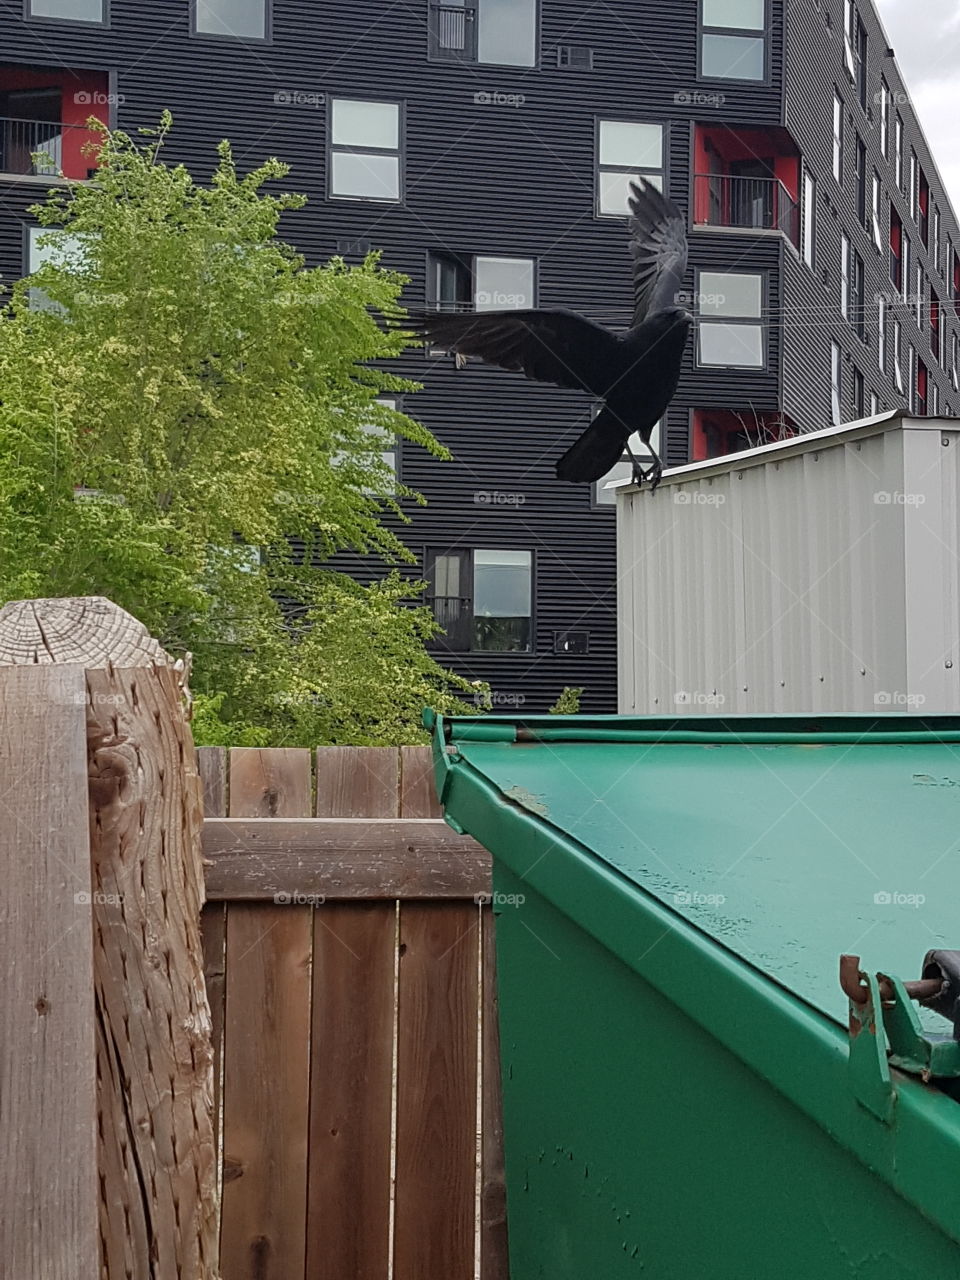 "Corrugated Crow" by Justin Hanuschuk, taking flight from a recycling bin